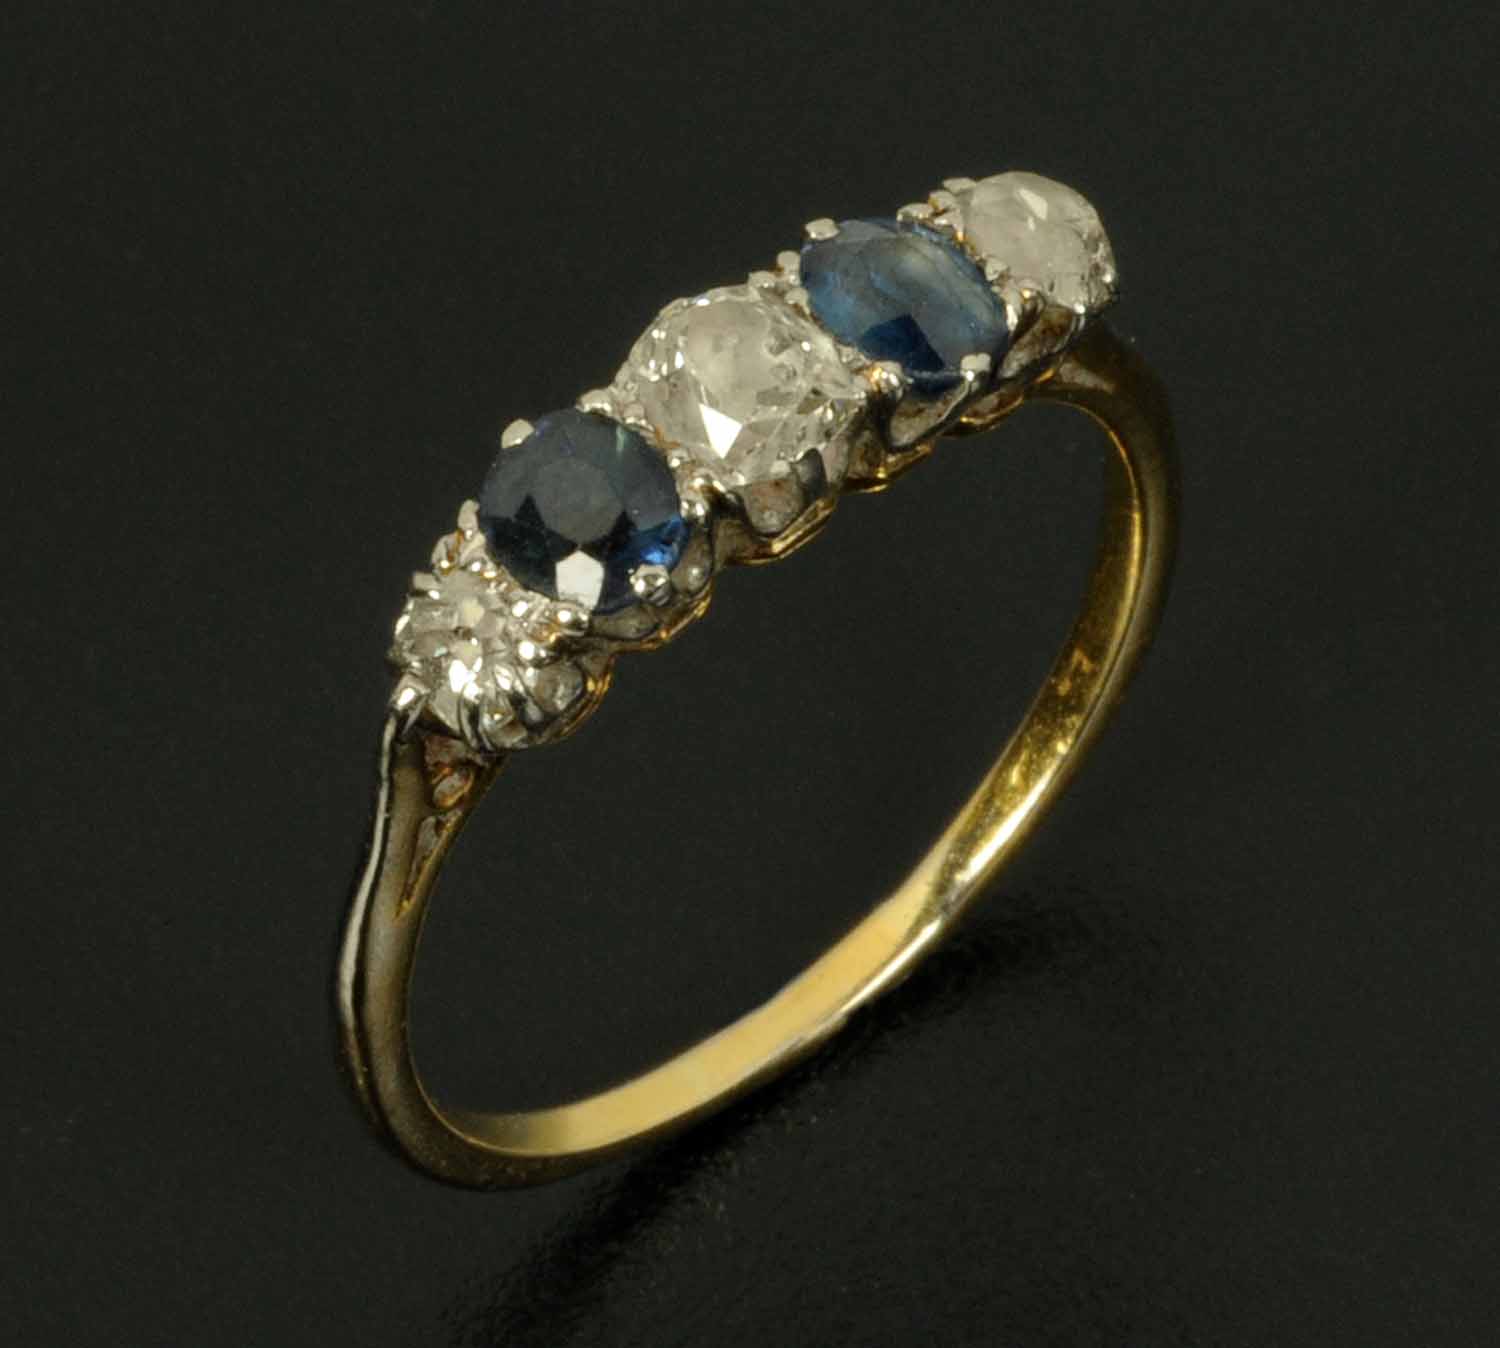 A sapphire and diamond five stone ring, with yellow gold coloured metal shank, hallmark rubbed, size